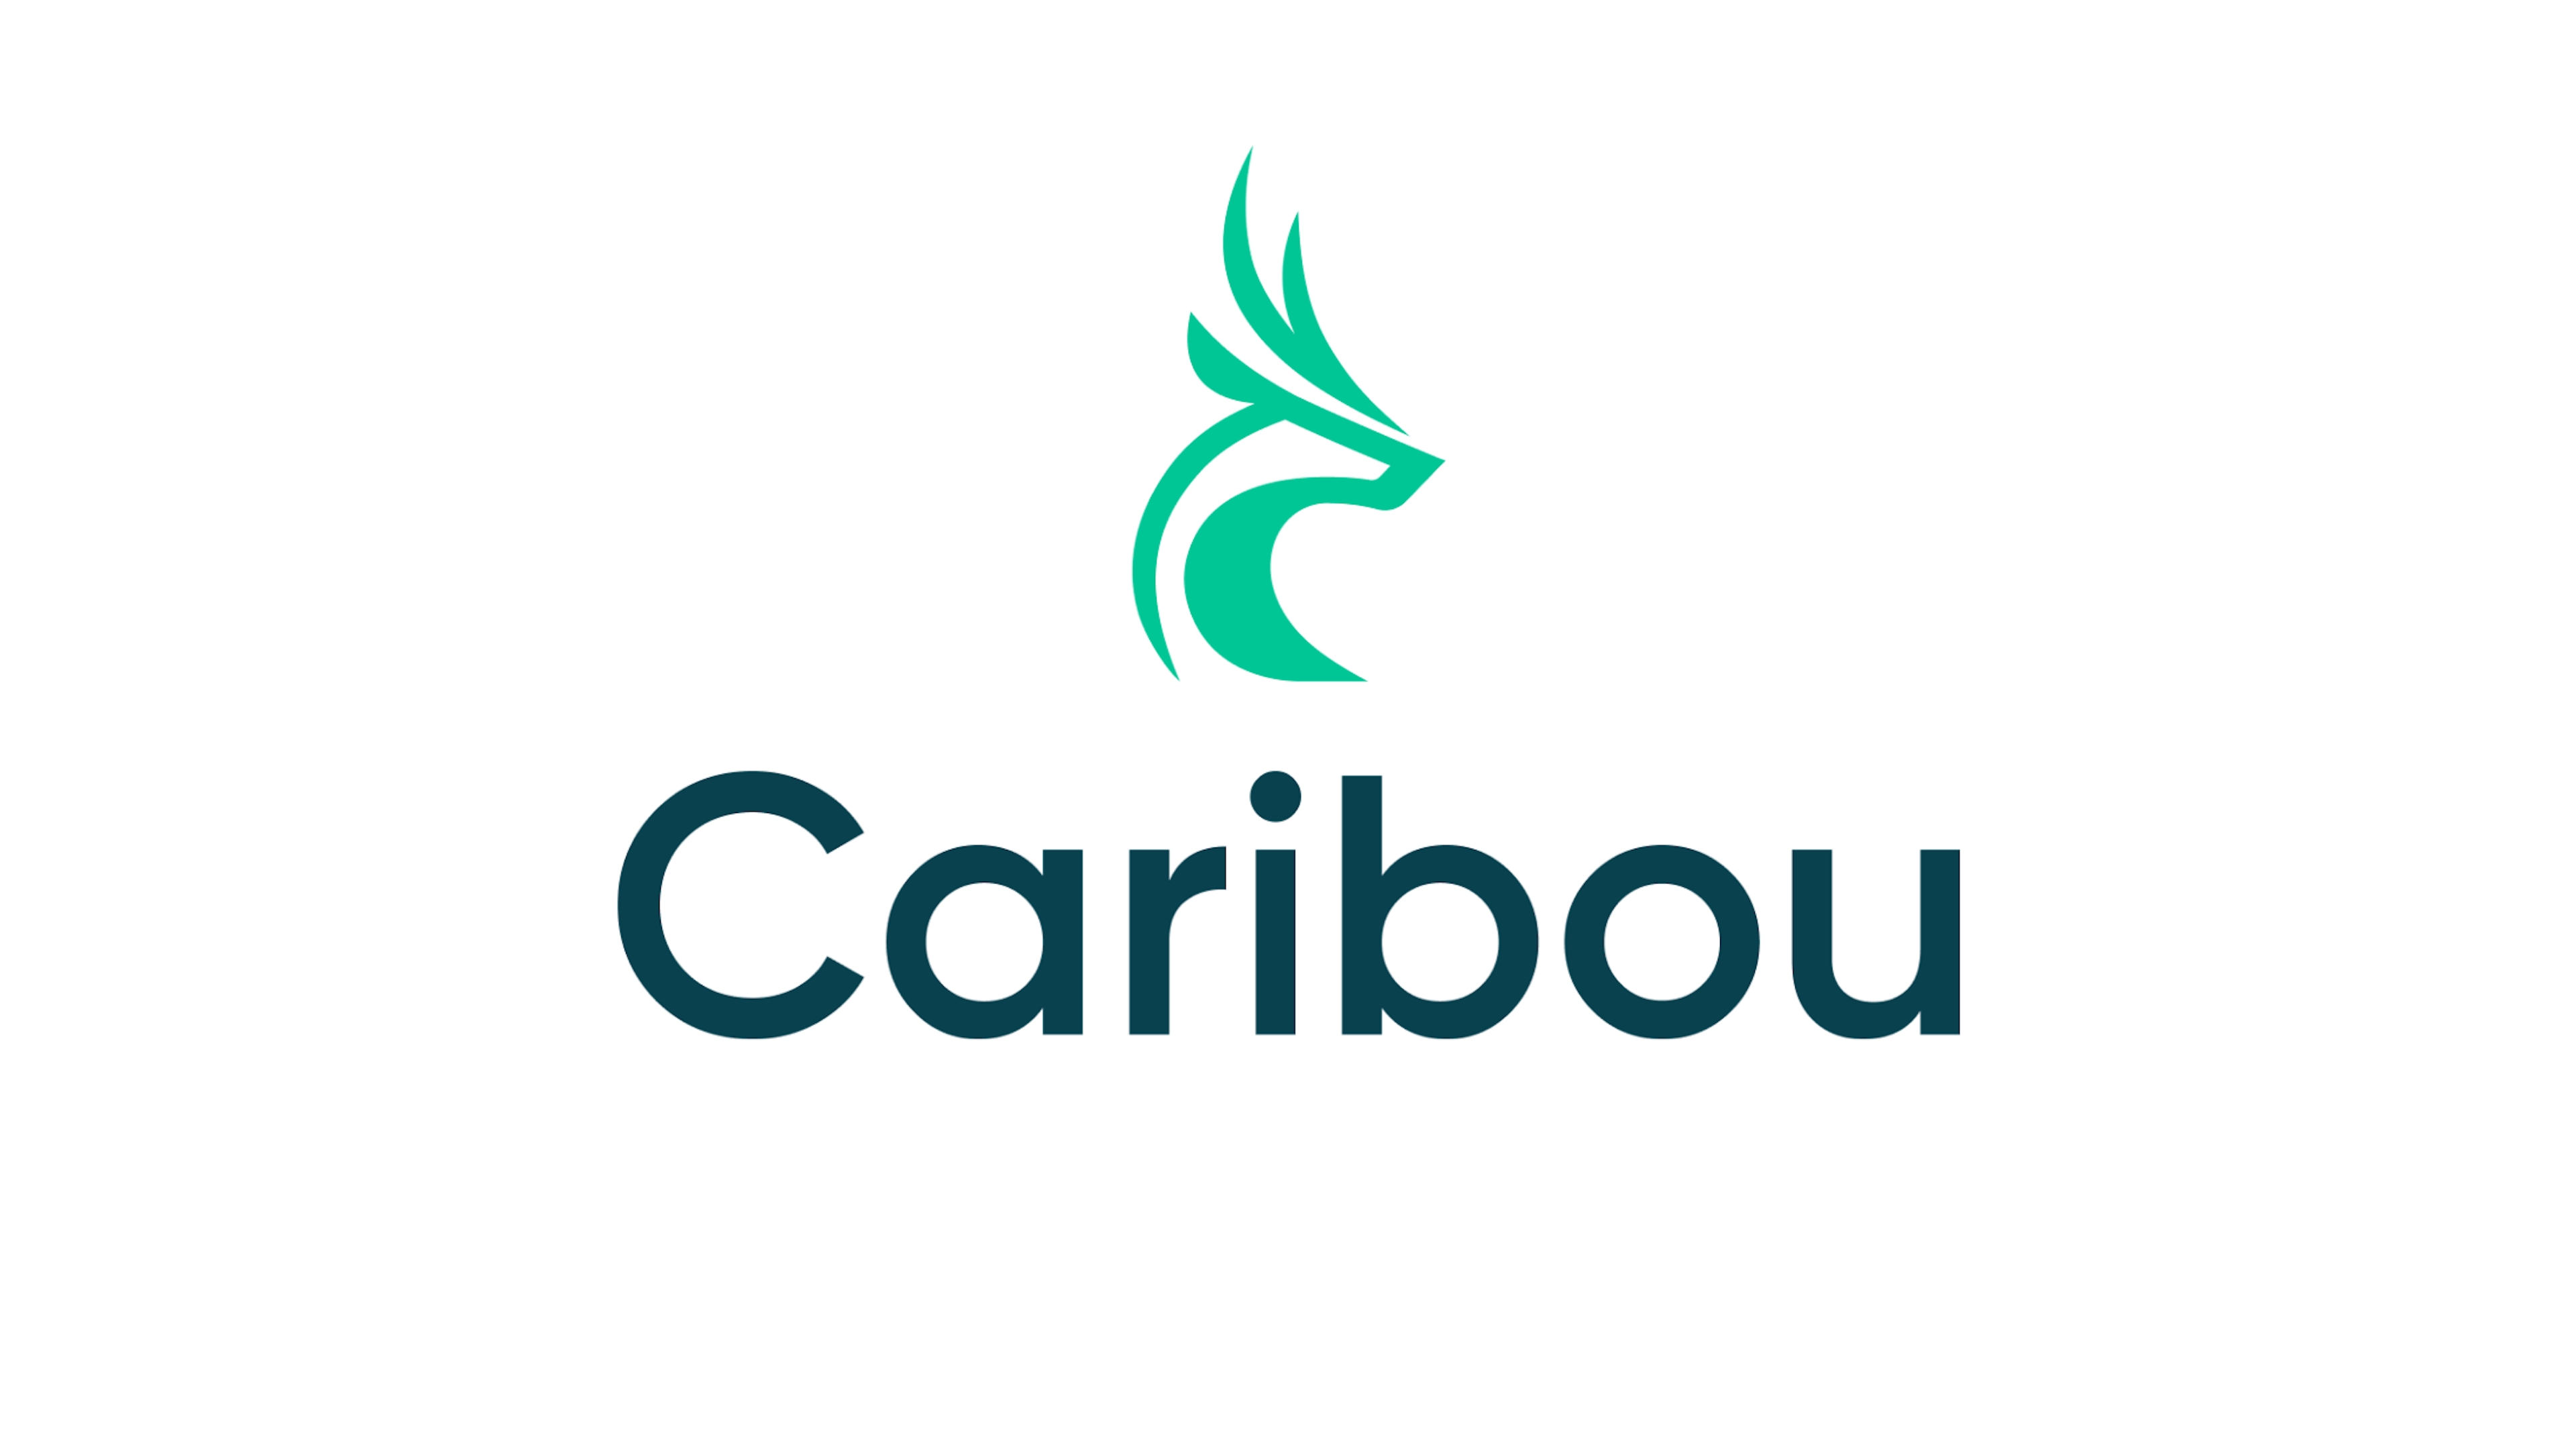 Working at Caribou - Build a Simple Way to Refinance